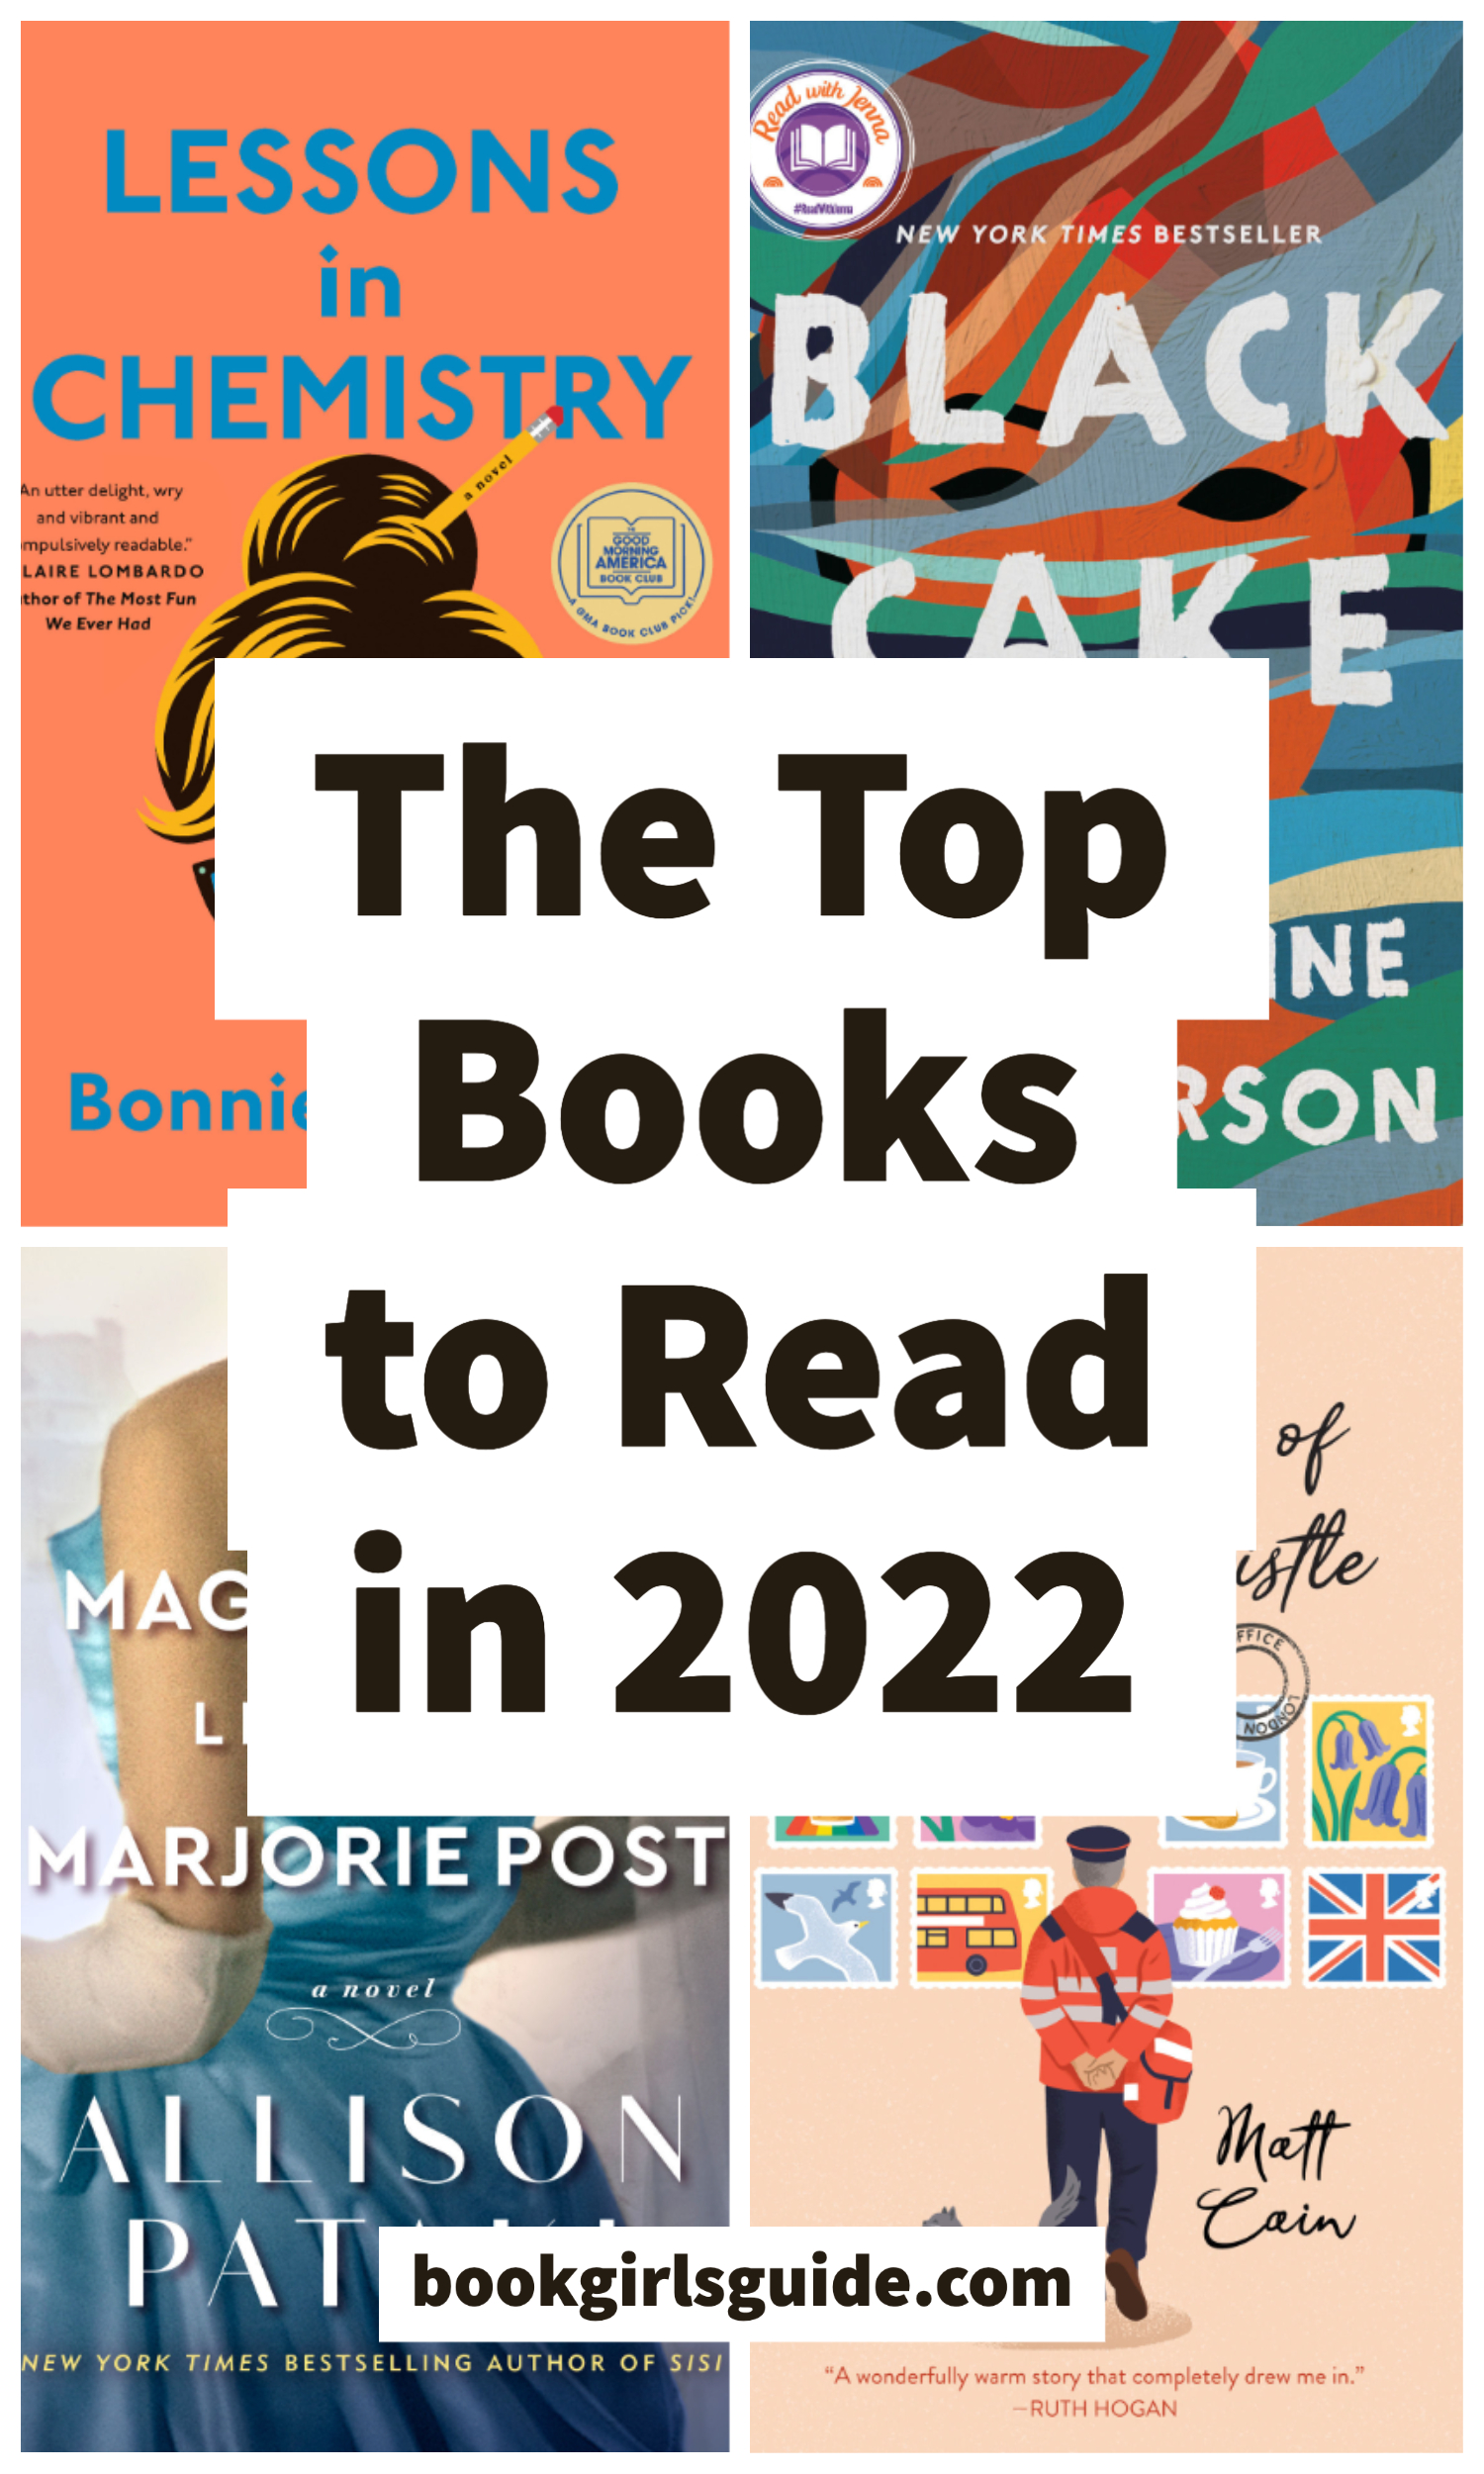 Four book covers (Lessons in Chemistry, Black Cake, The Magnificent Lives of Marjorie Post, The Secret Life of Albert Entwistle) with the text: The Top Books to Read in 2022